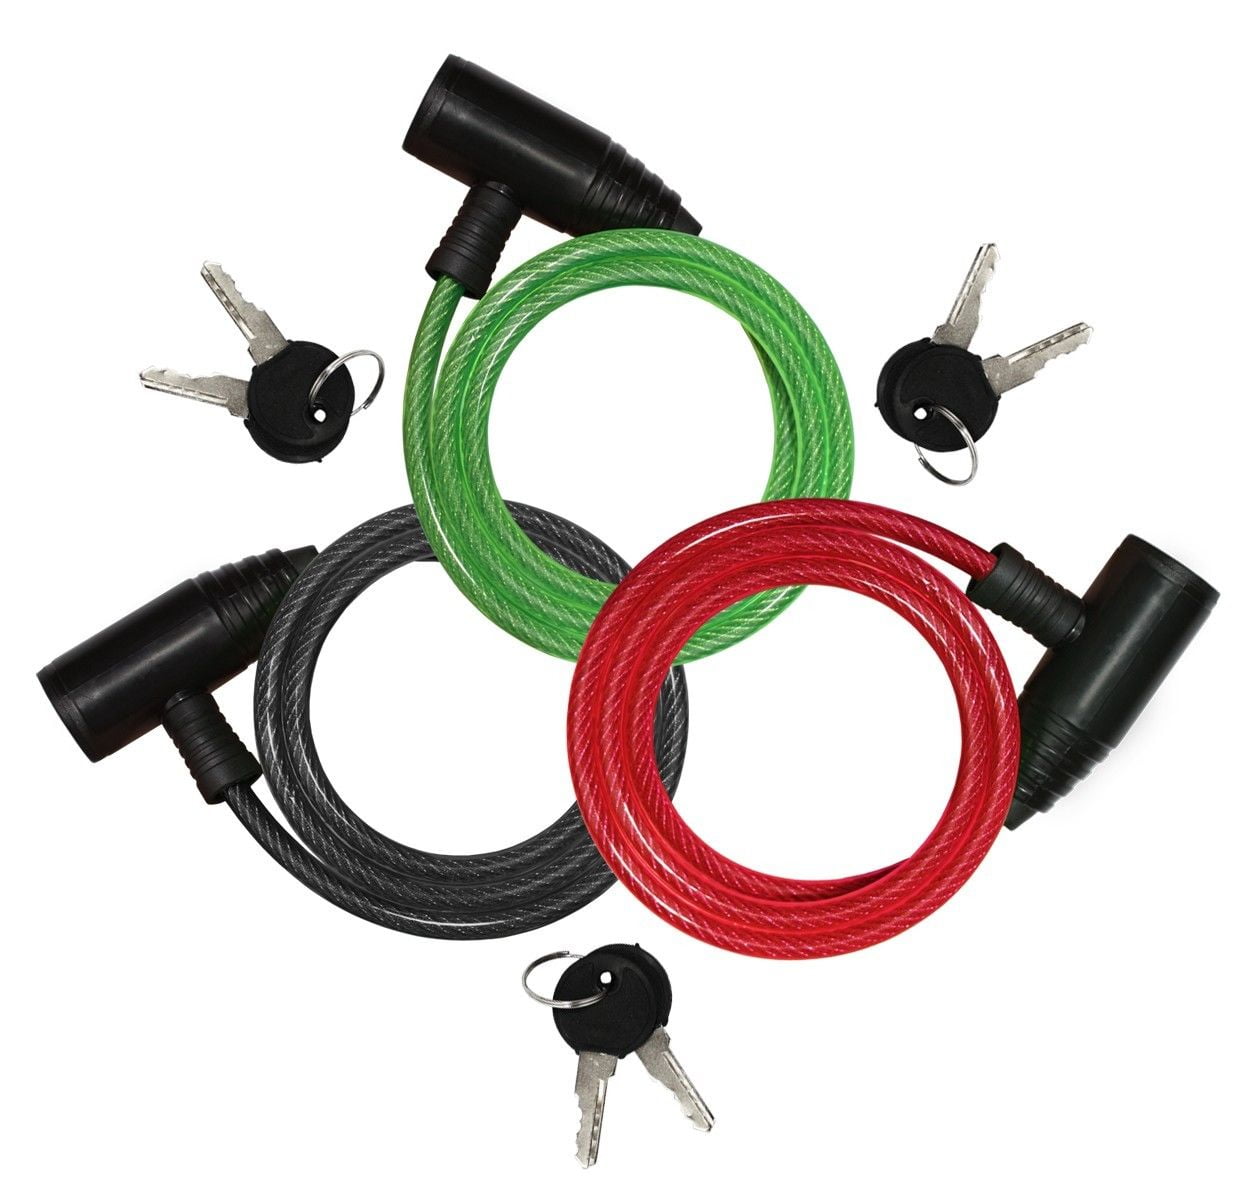 36'' Anti-Theft Pick Your Color Steel Cable Bike Lock With 2 Keys